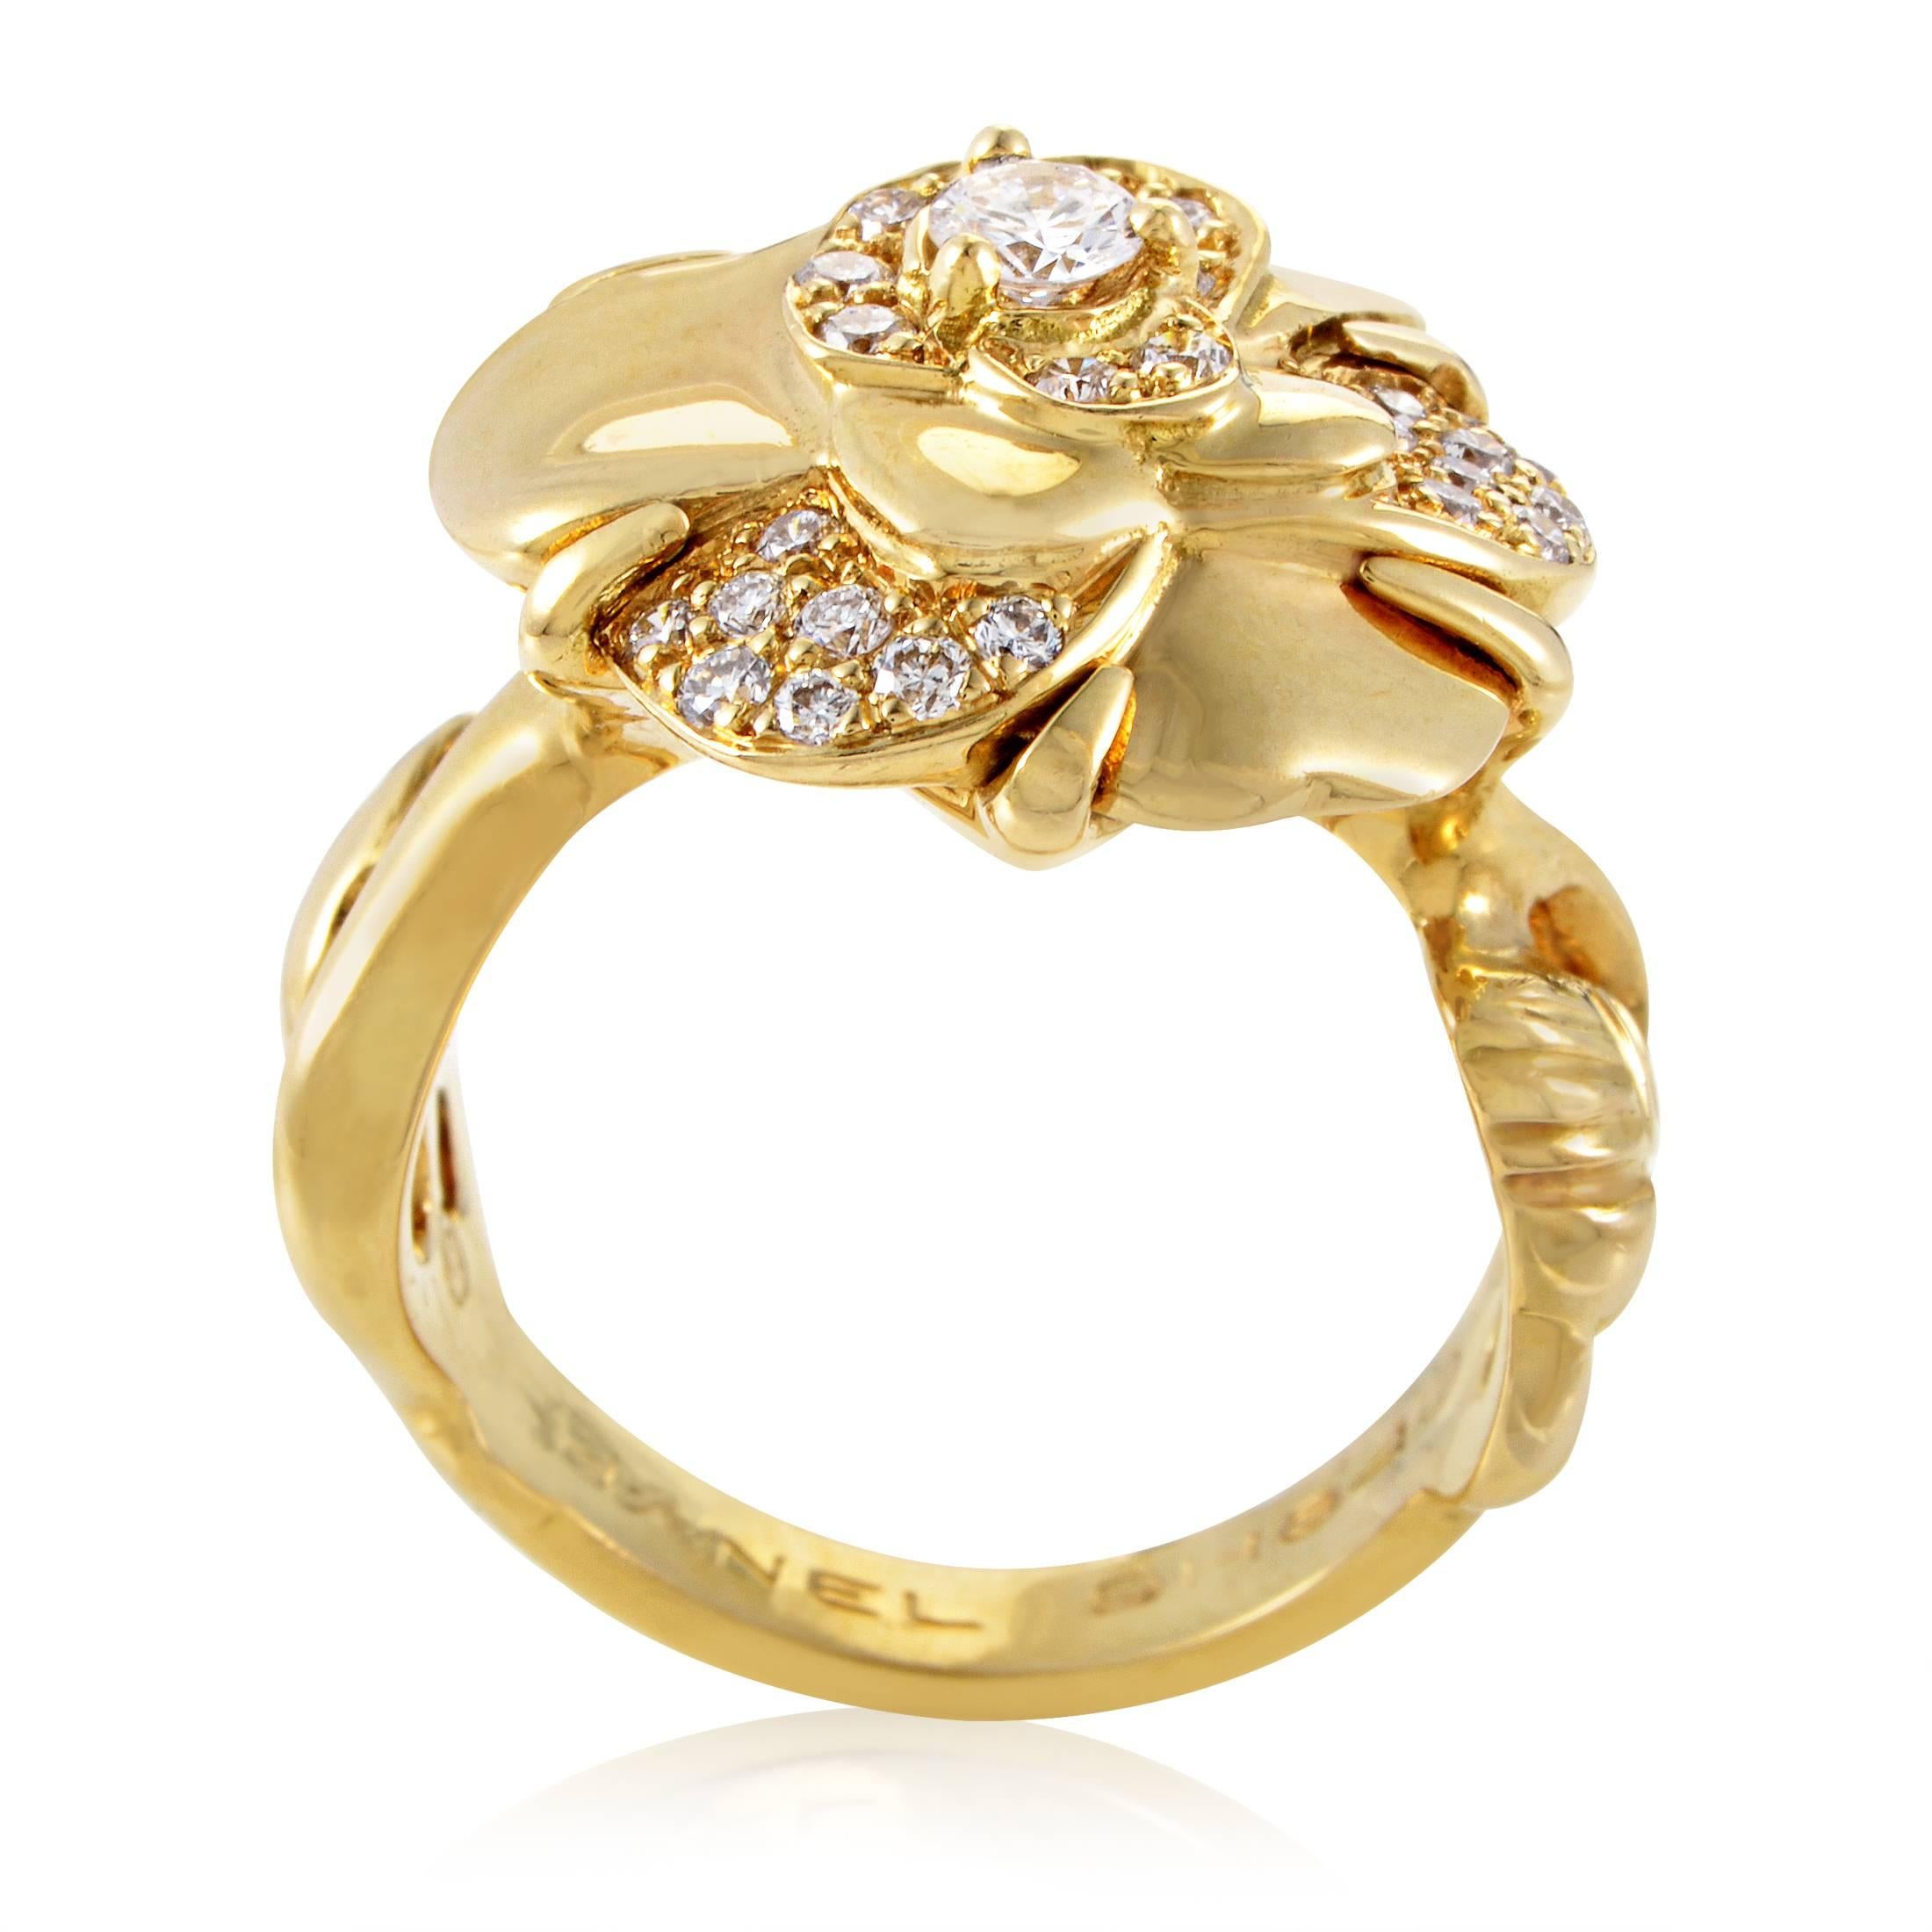 Placing the exuberant brilliance of diamonds totaling 0.43ct against the delightfully gleaming reflective surface of 18K yellow gold, this gorgeous ring from Chanel boasts a wonderfully designed and impeccably crafted shape of a fabulous flower on